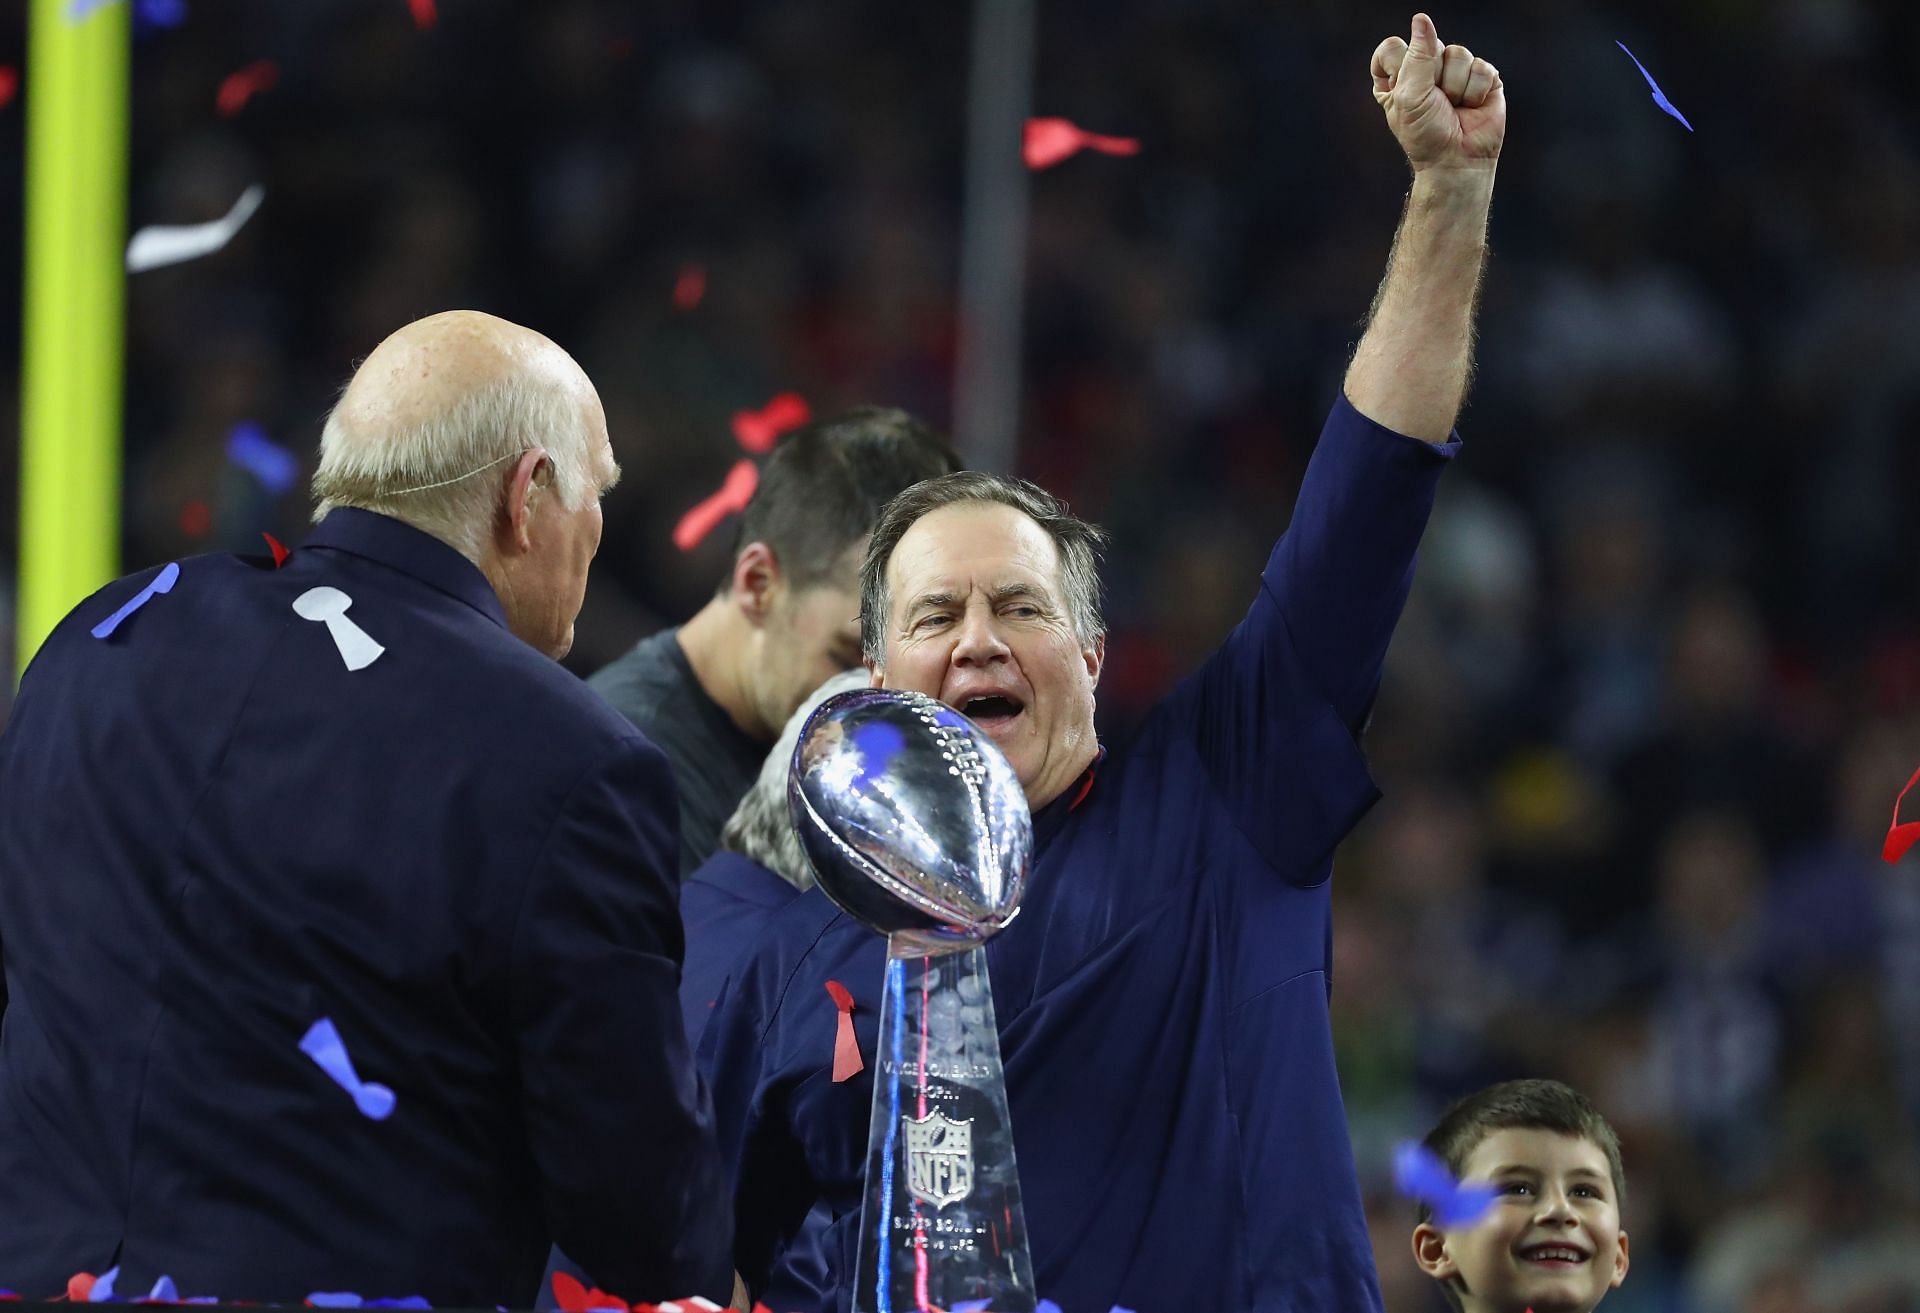 Super Bowl LI was the most excellent game coached by Bill Belichick in his NFL career.